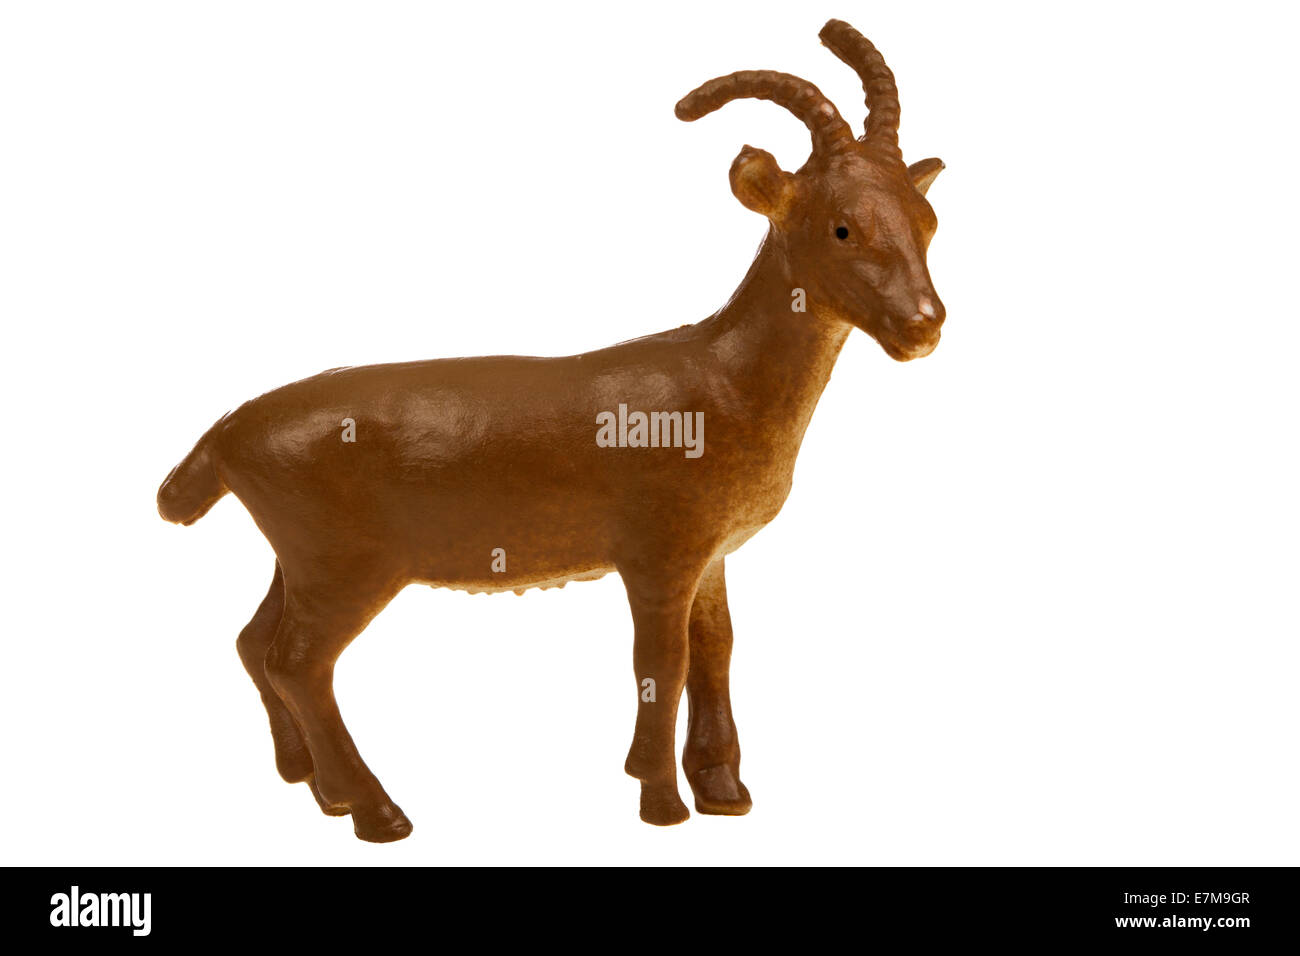 A brownish goat plastic toy for kids isolated on white background Stock Photo